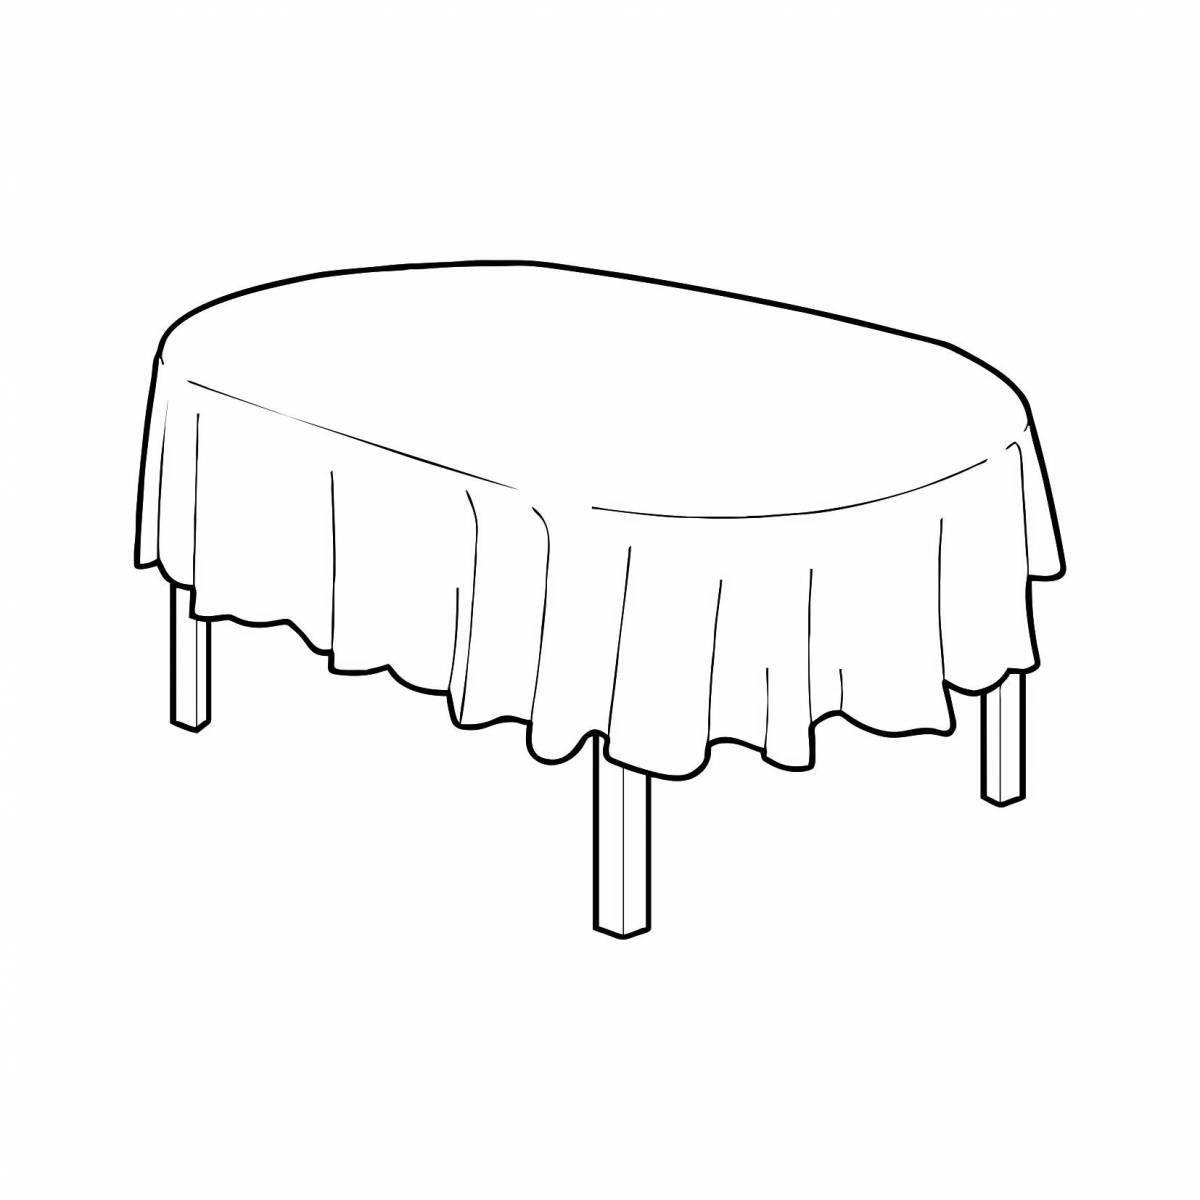 Gorgeous tablecloth coloring book